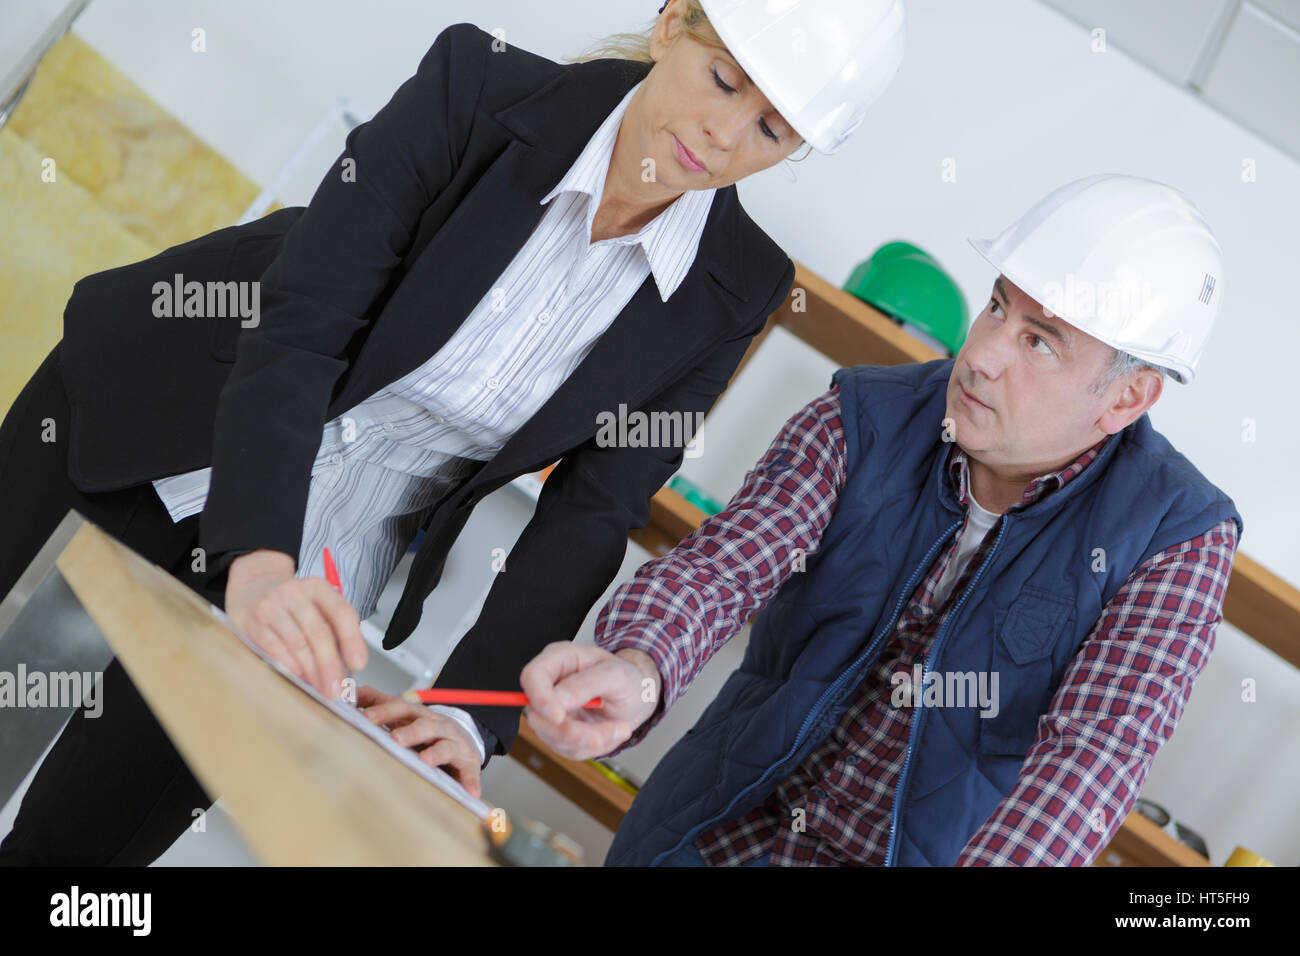 man carpenter and forewoman Stock Photo